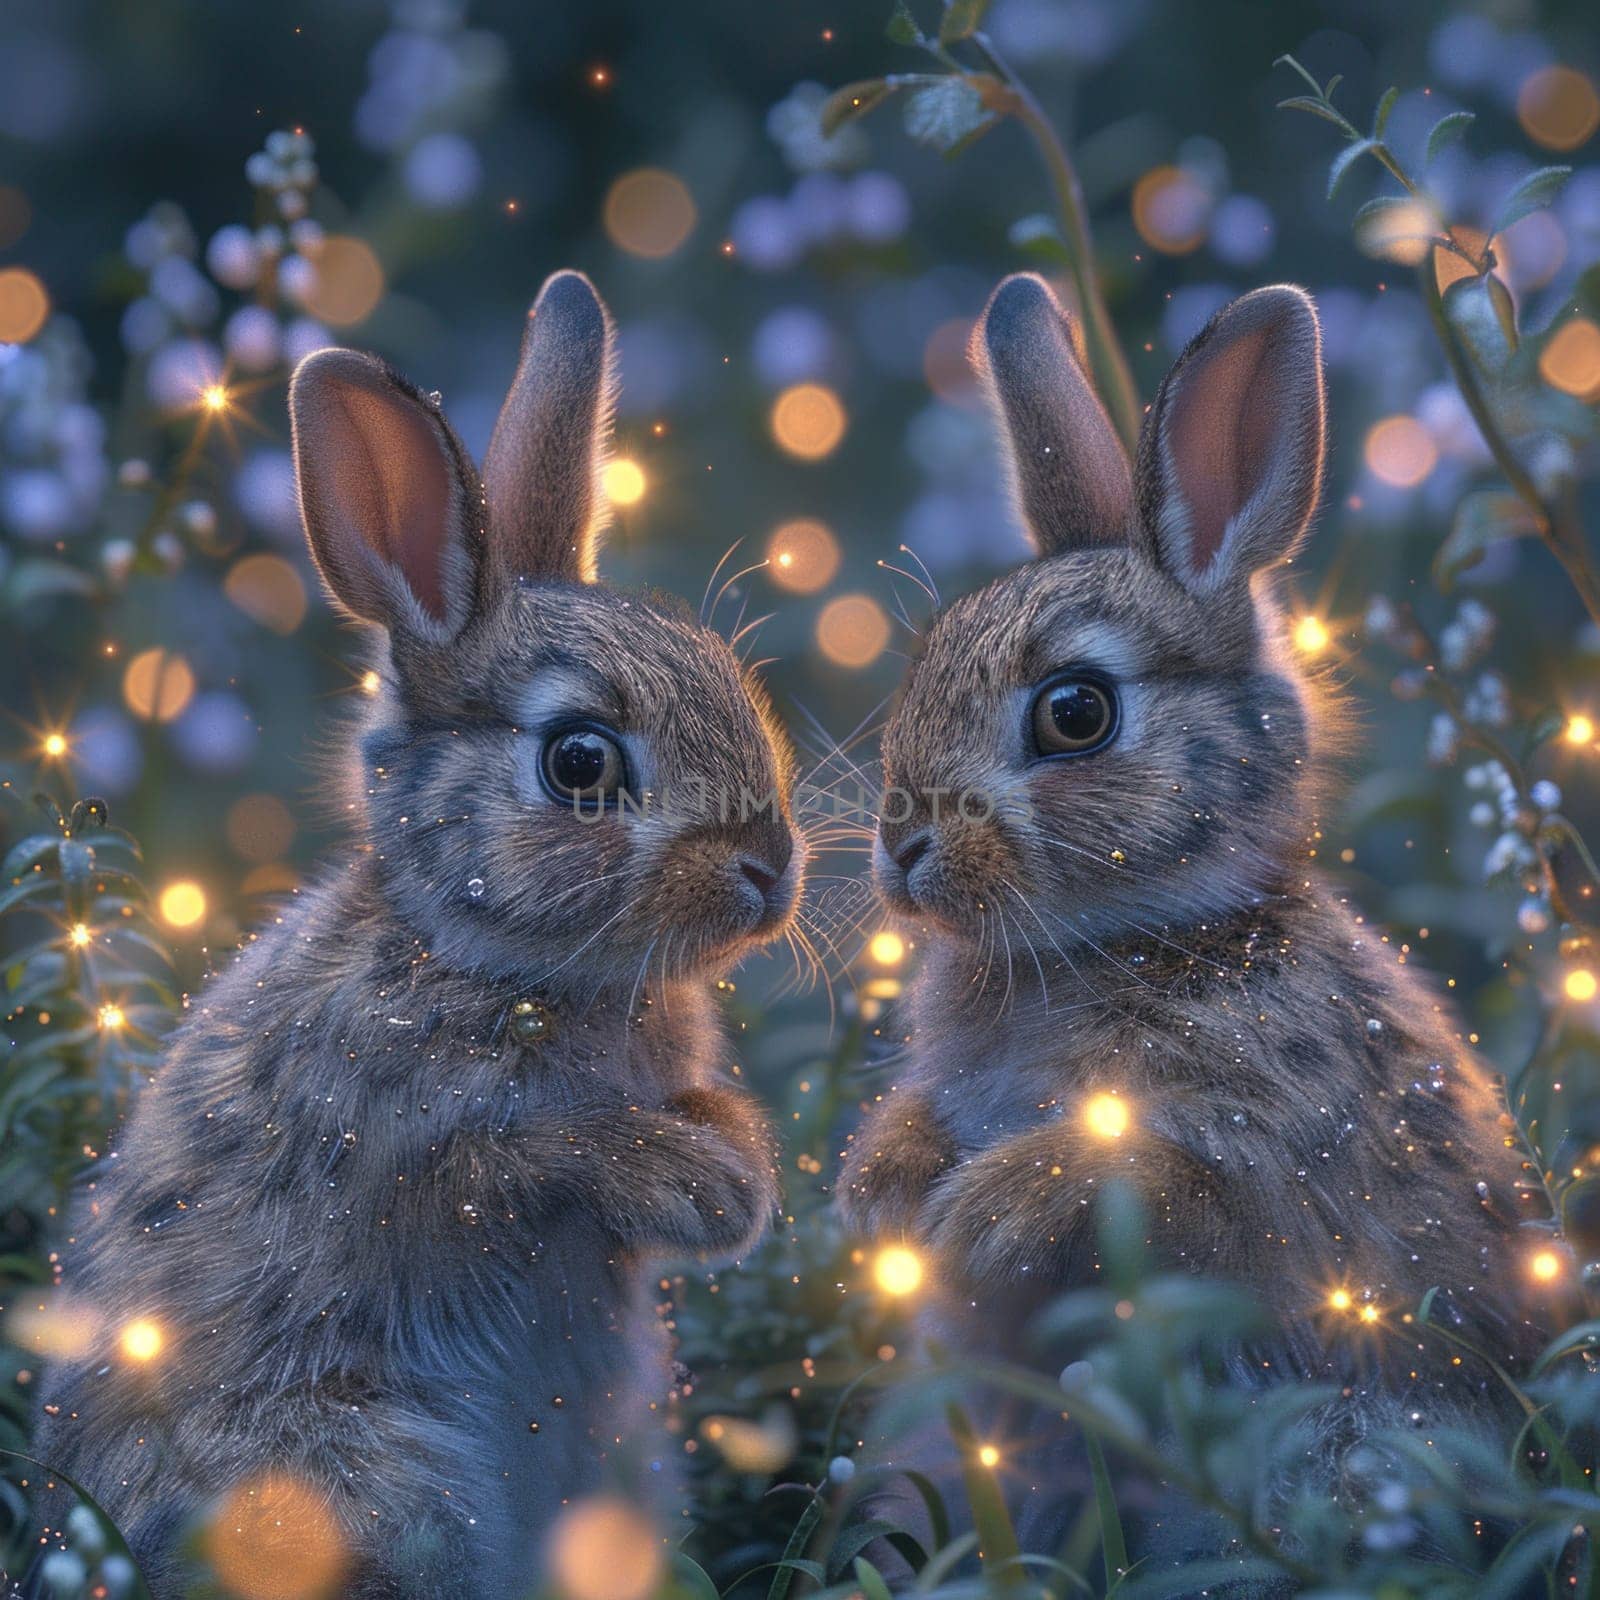 Two rabbits are seated in a grassy field.